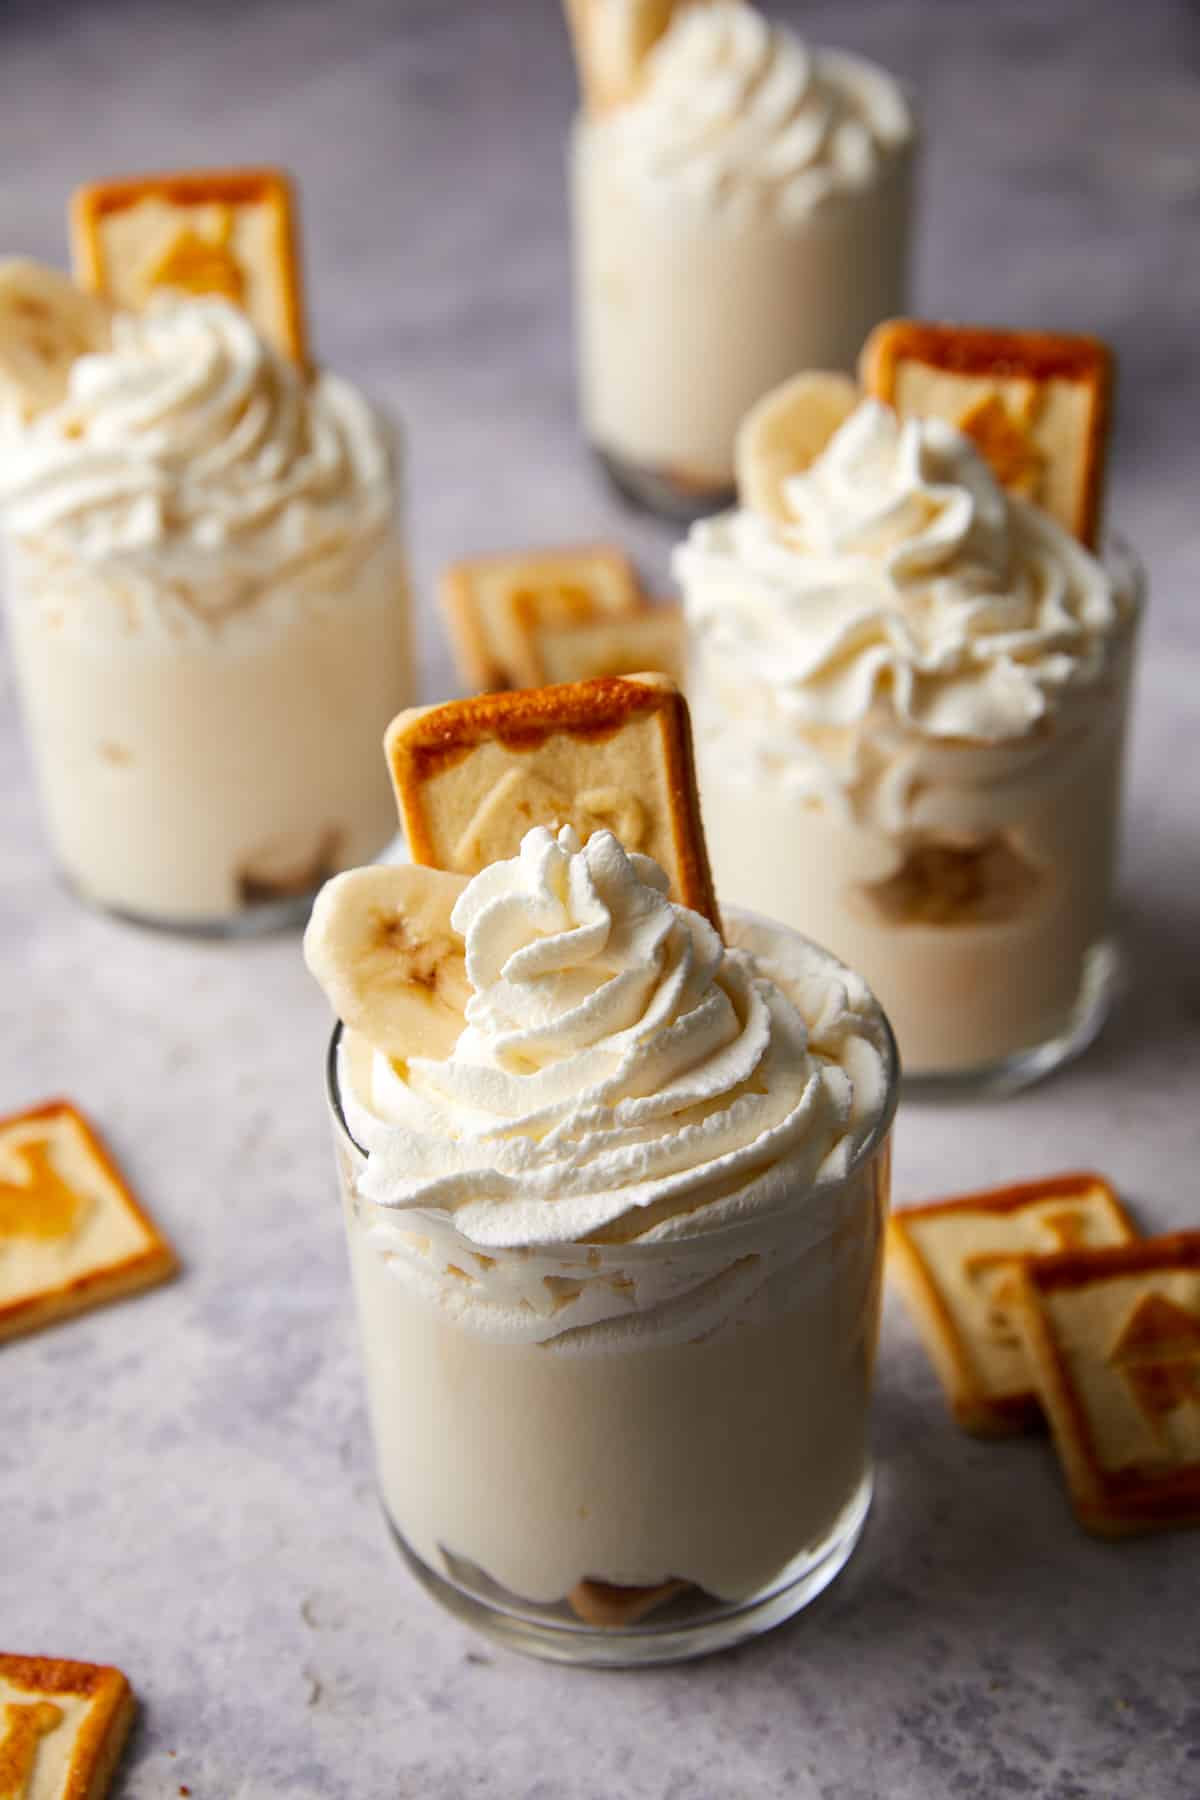 Close-up view of the finished banana pudding cup.